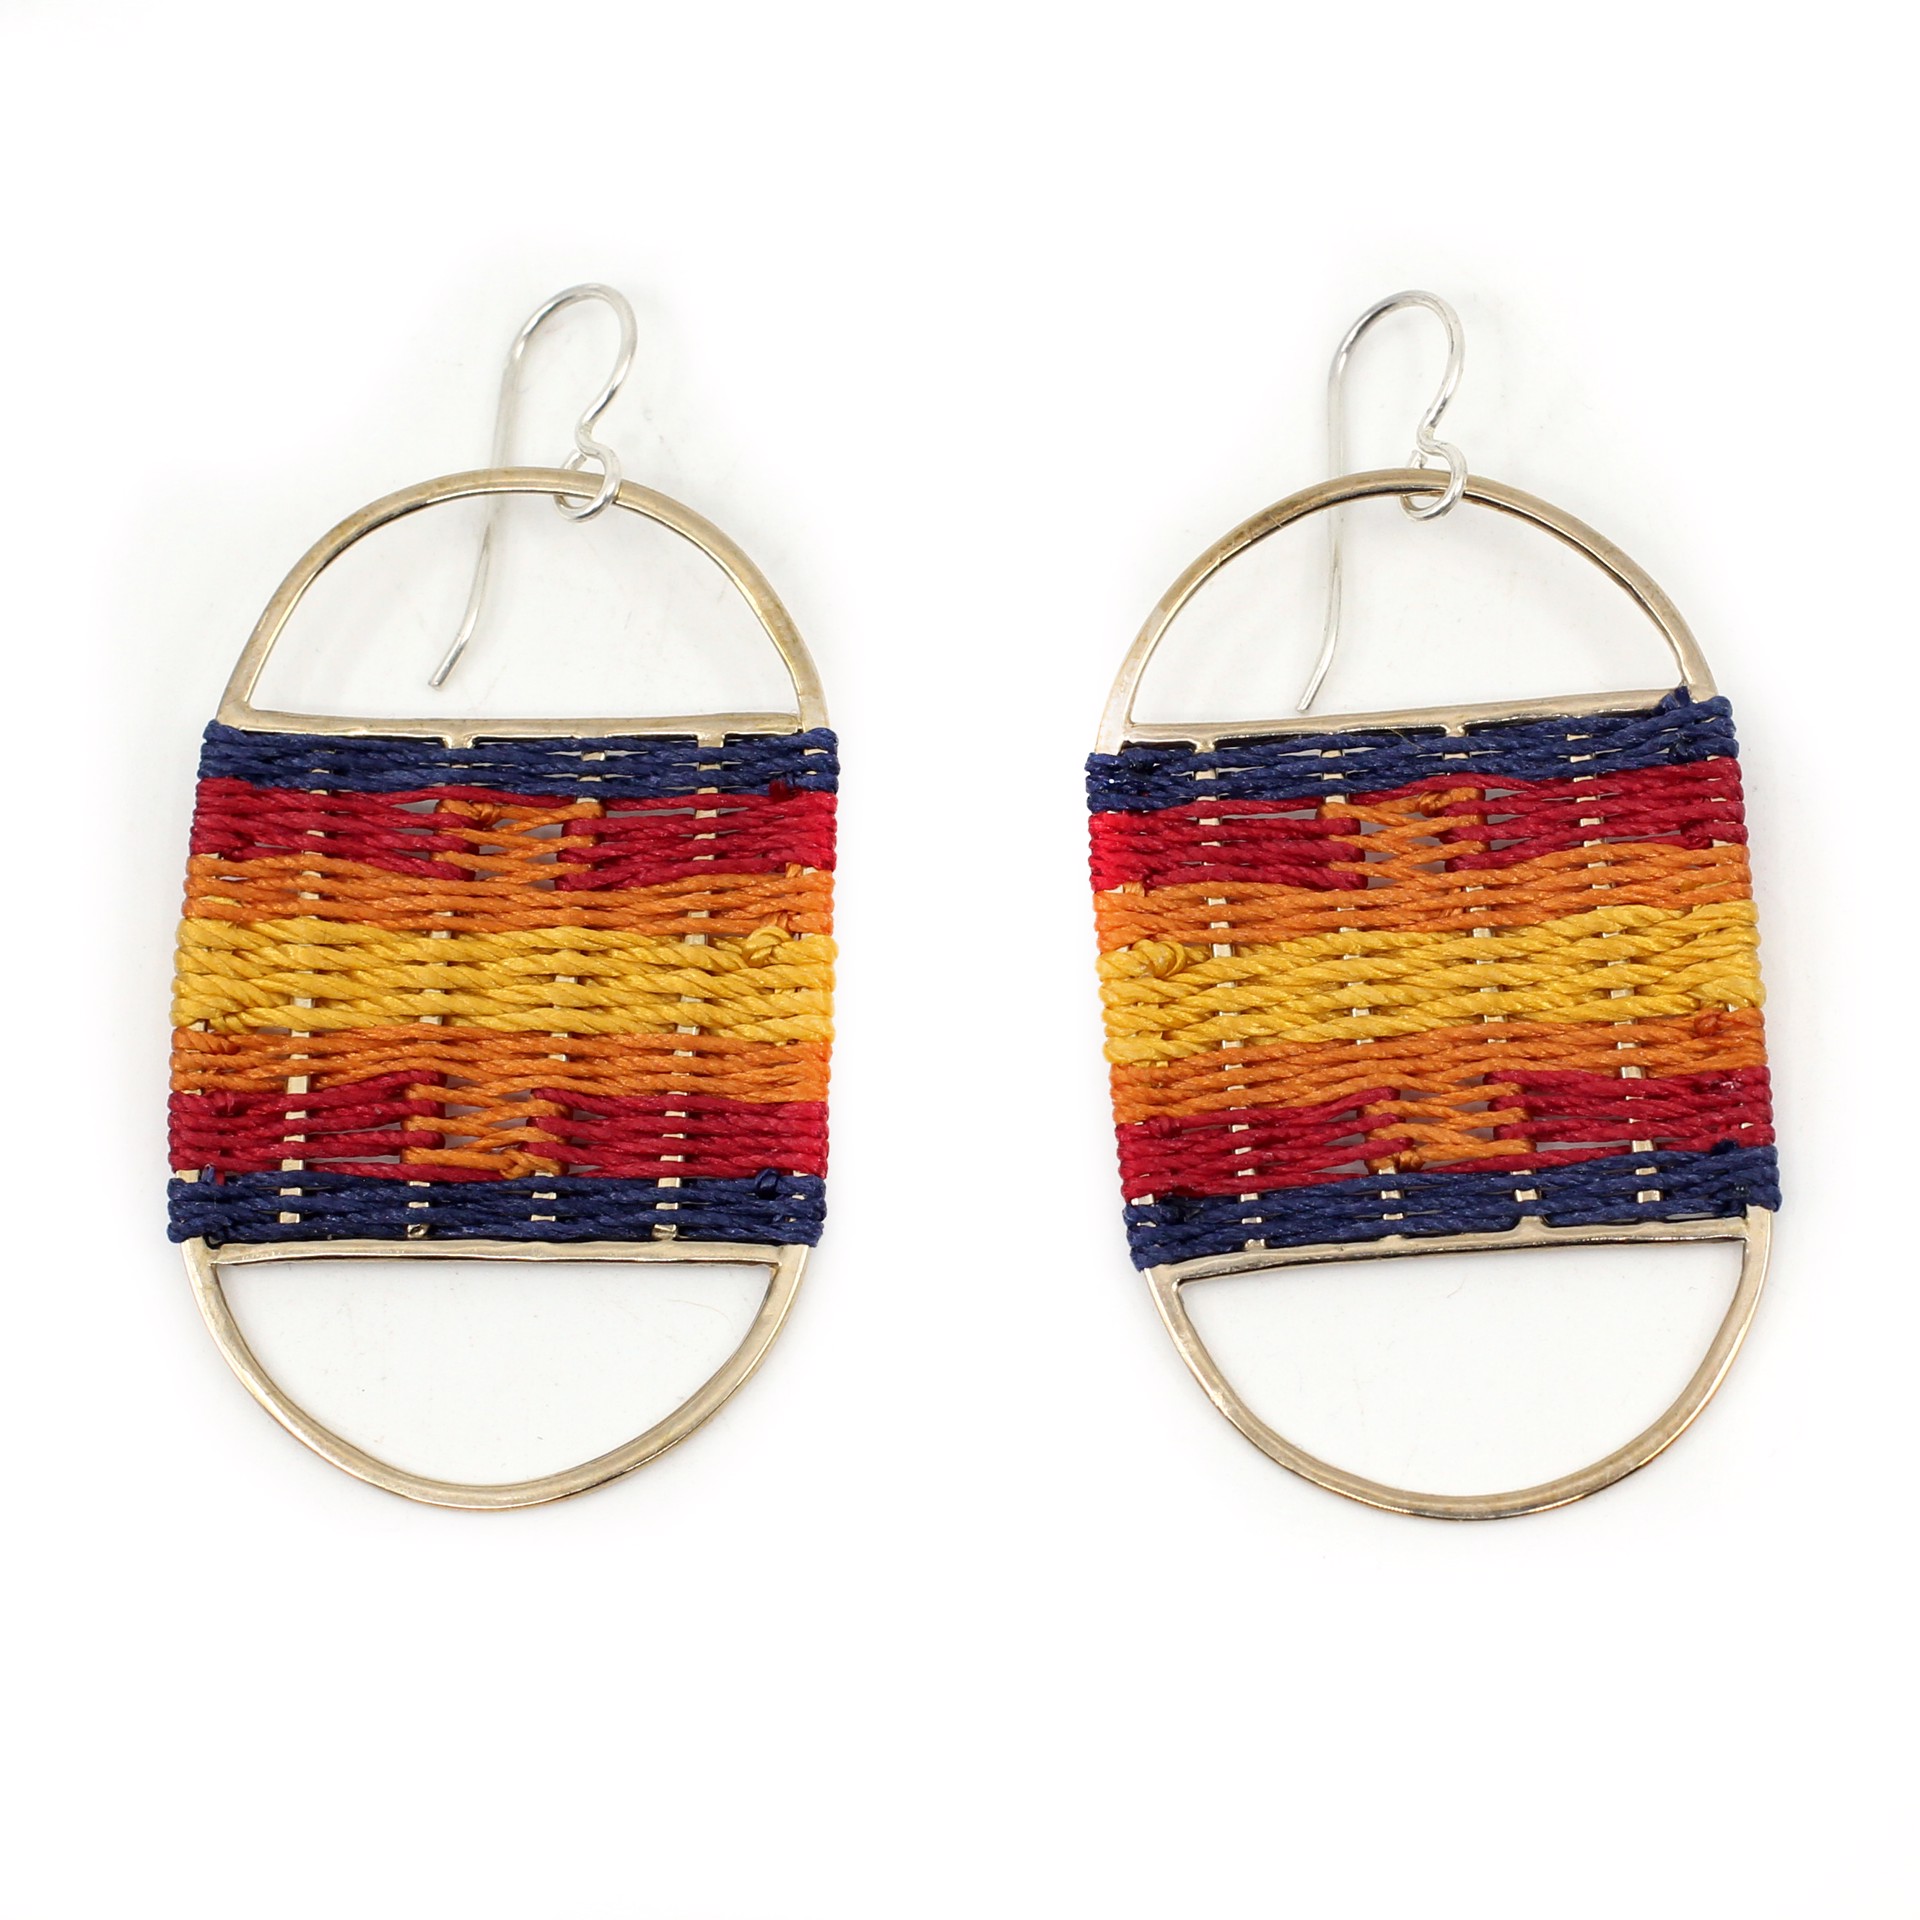 Sunset Earrings (gold/red/blue) by Flag Mountain Jewelry